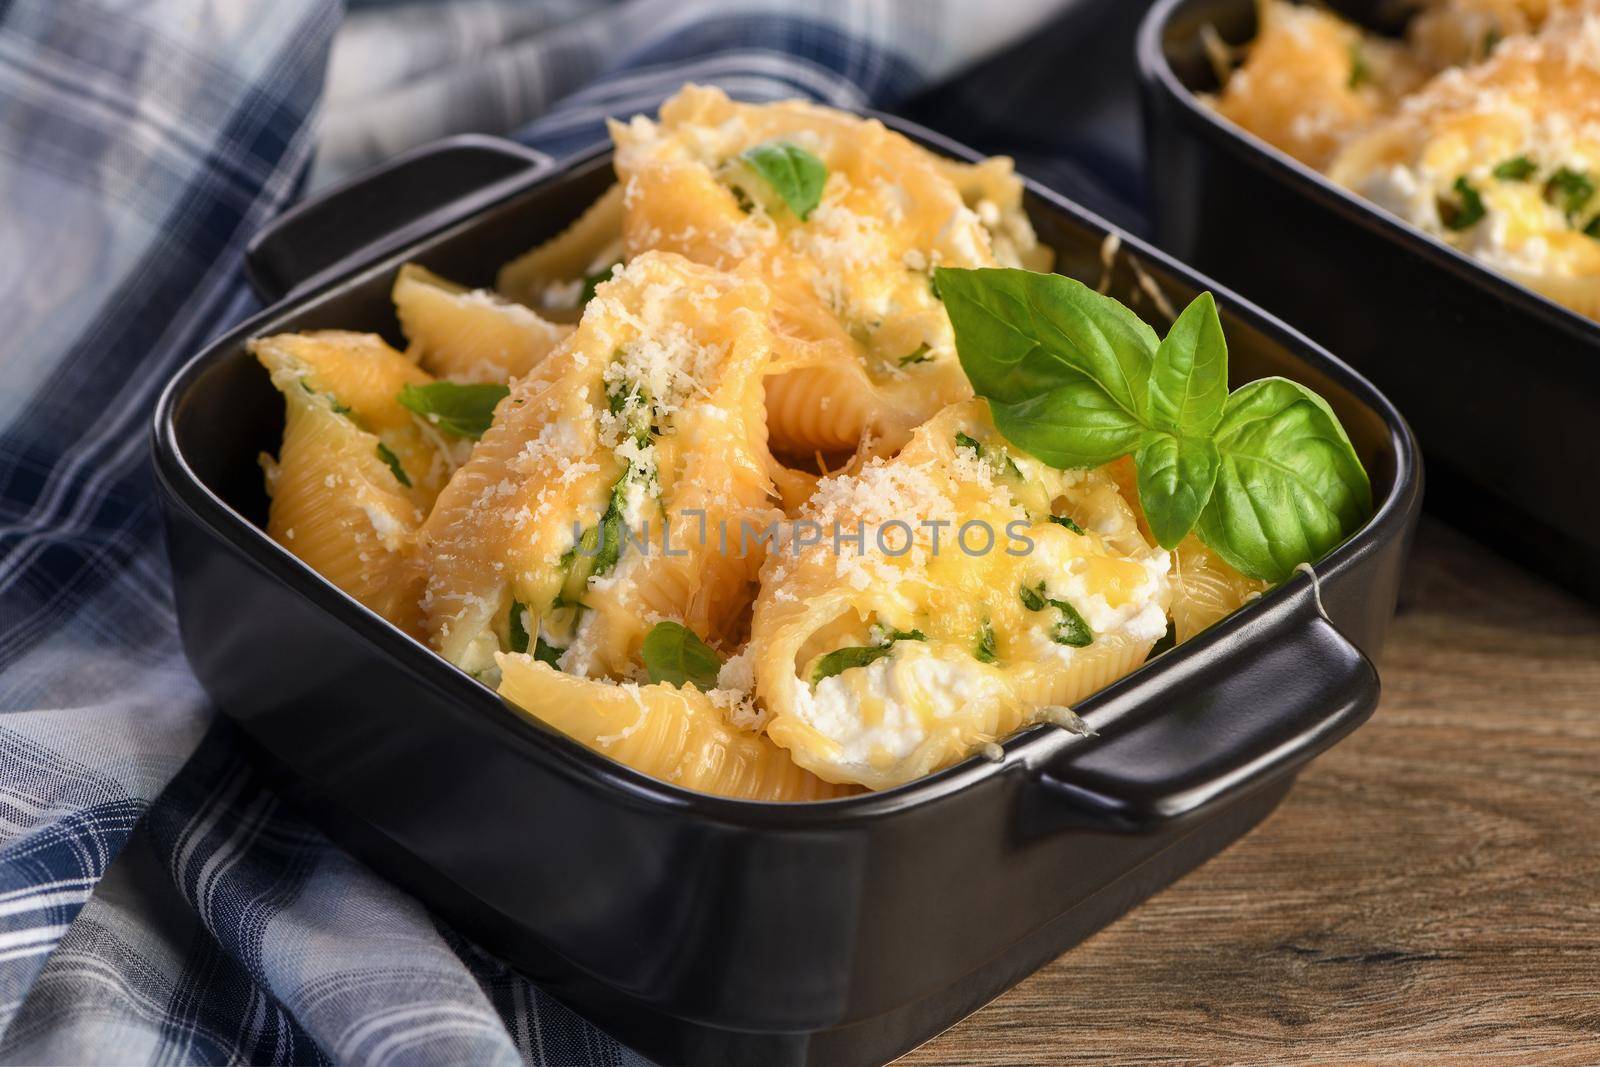 Pasta Сonchiglioni stuffed with spinach, ricotta and parmesan baked